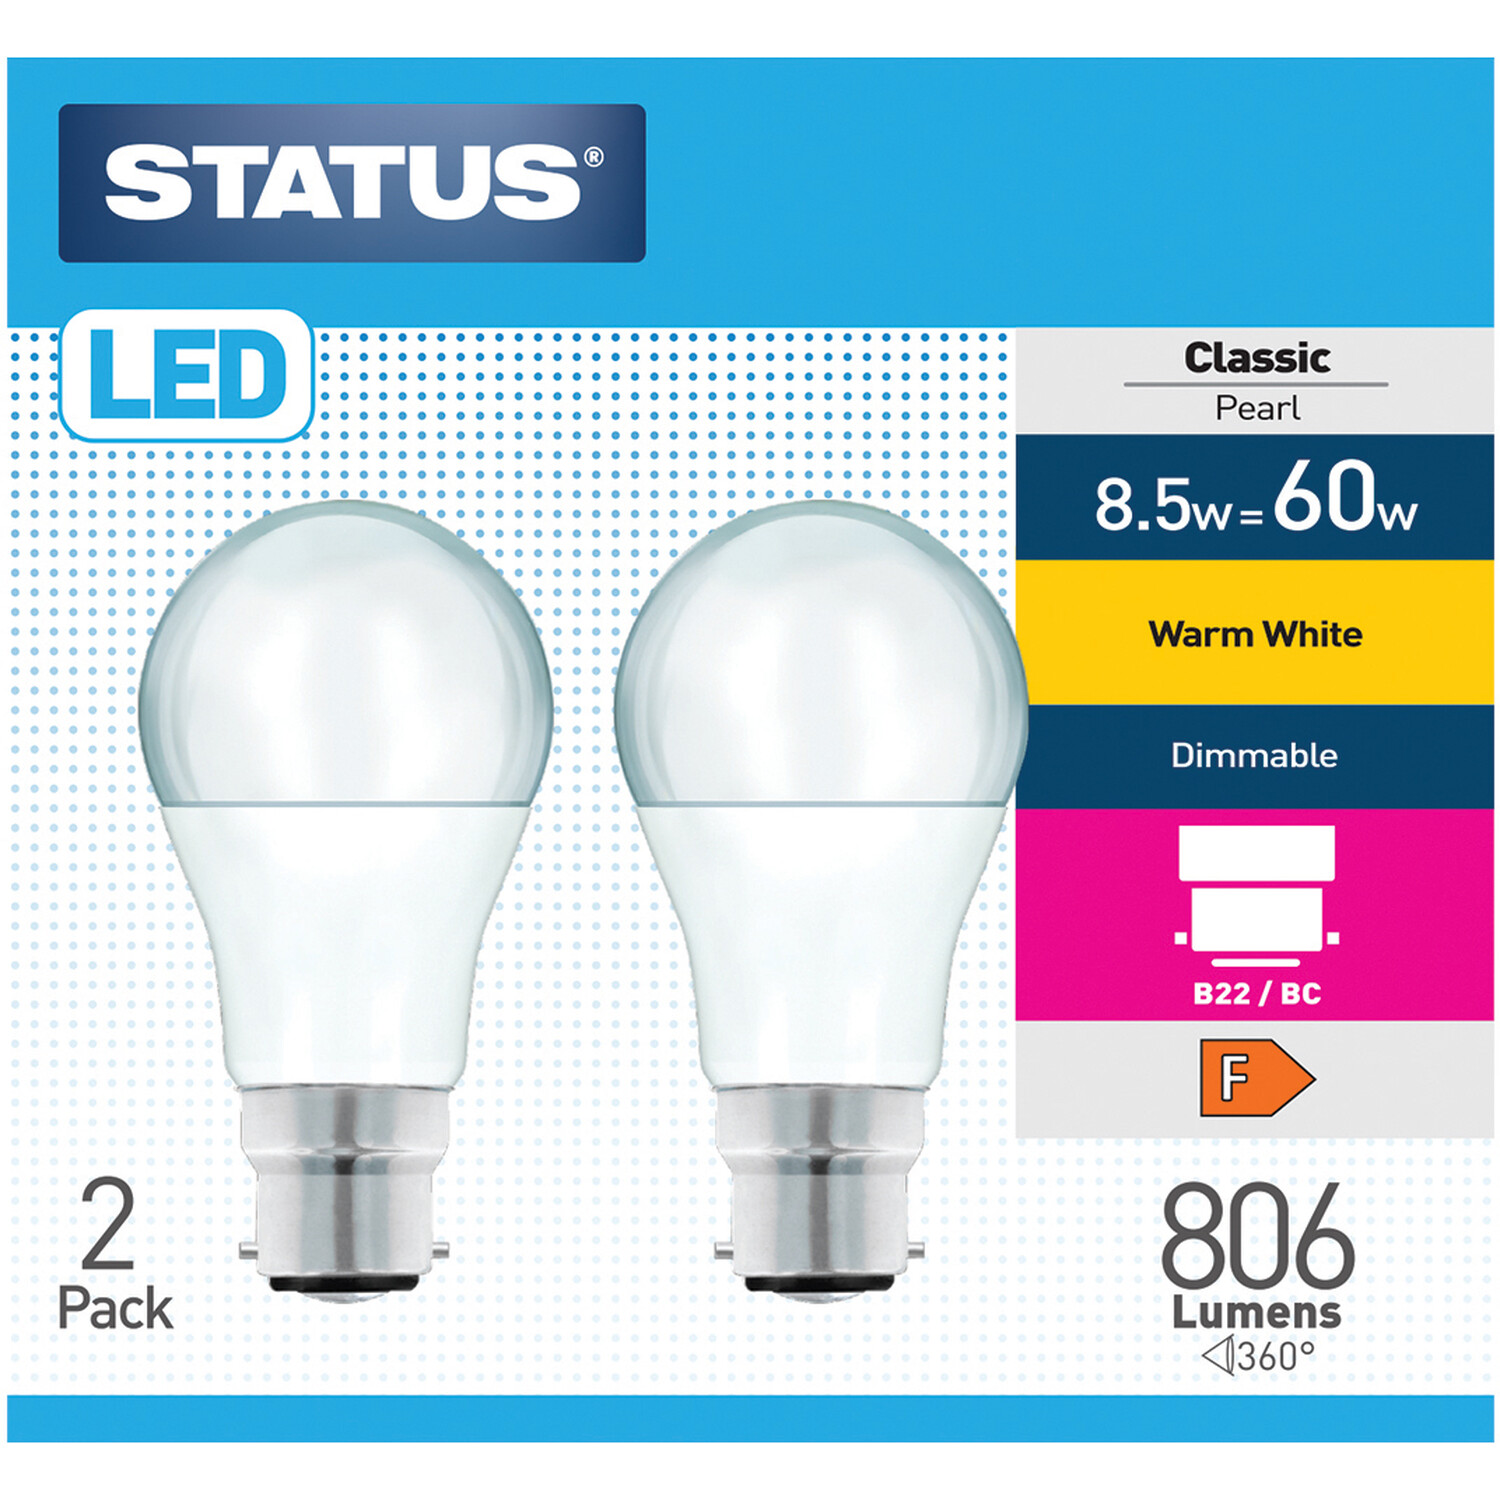 Pack of 2 Status Warm White Dimmable Classic Pearl Lightbulbs - Bayonet Cap / BC Image 1